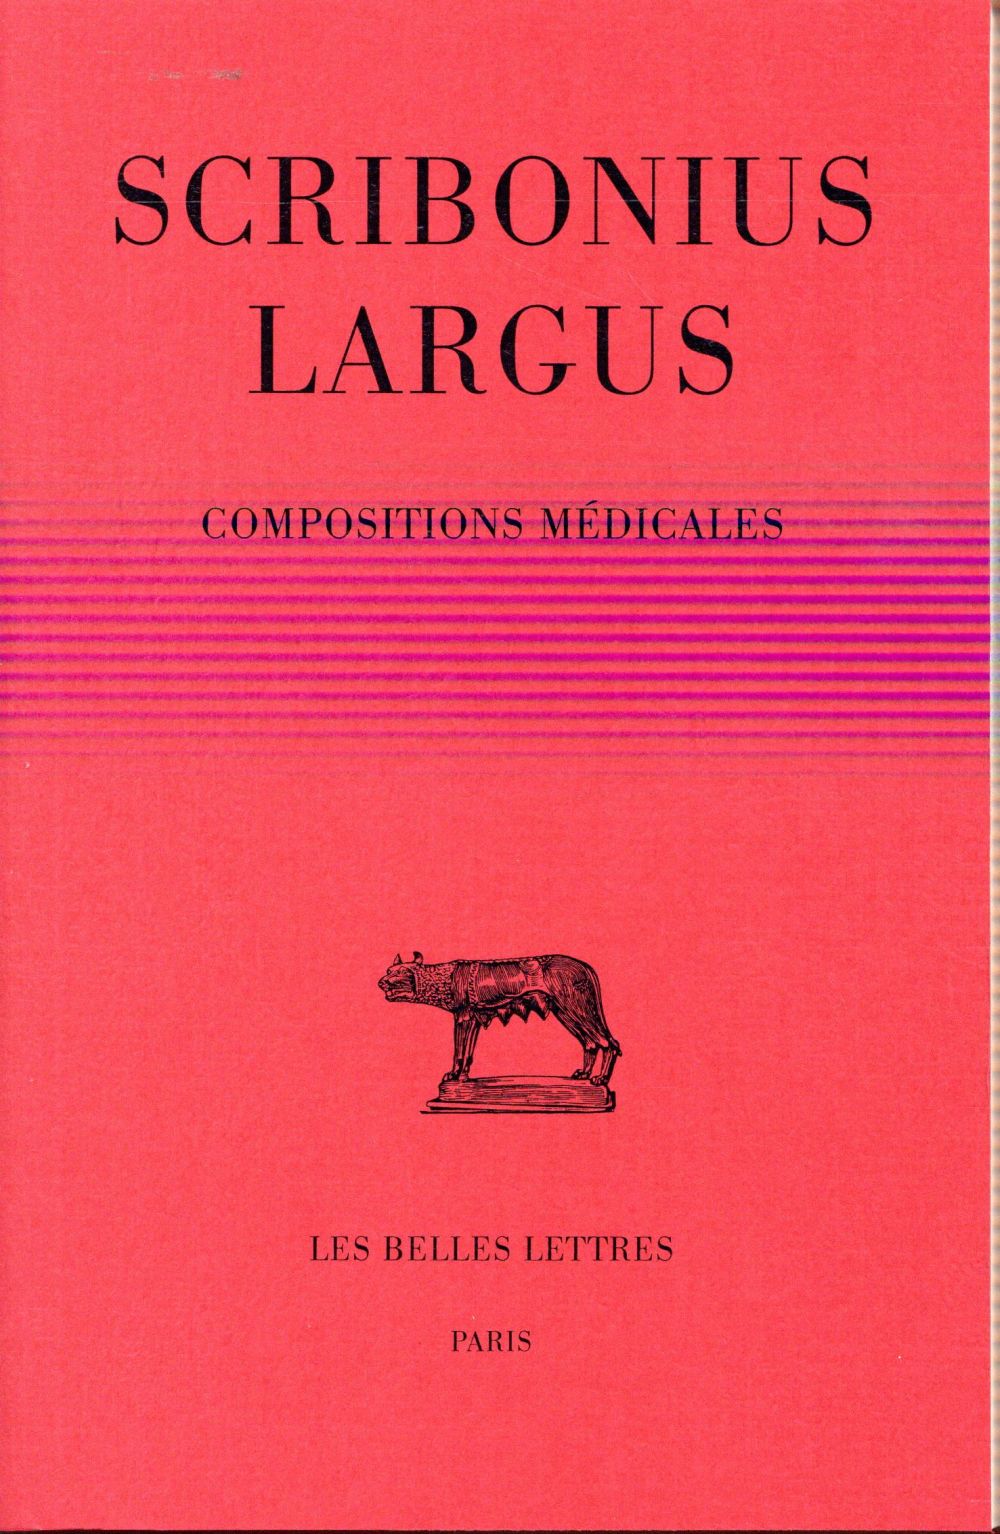 COMPOSITIONS MEDICALES